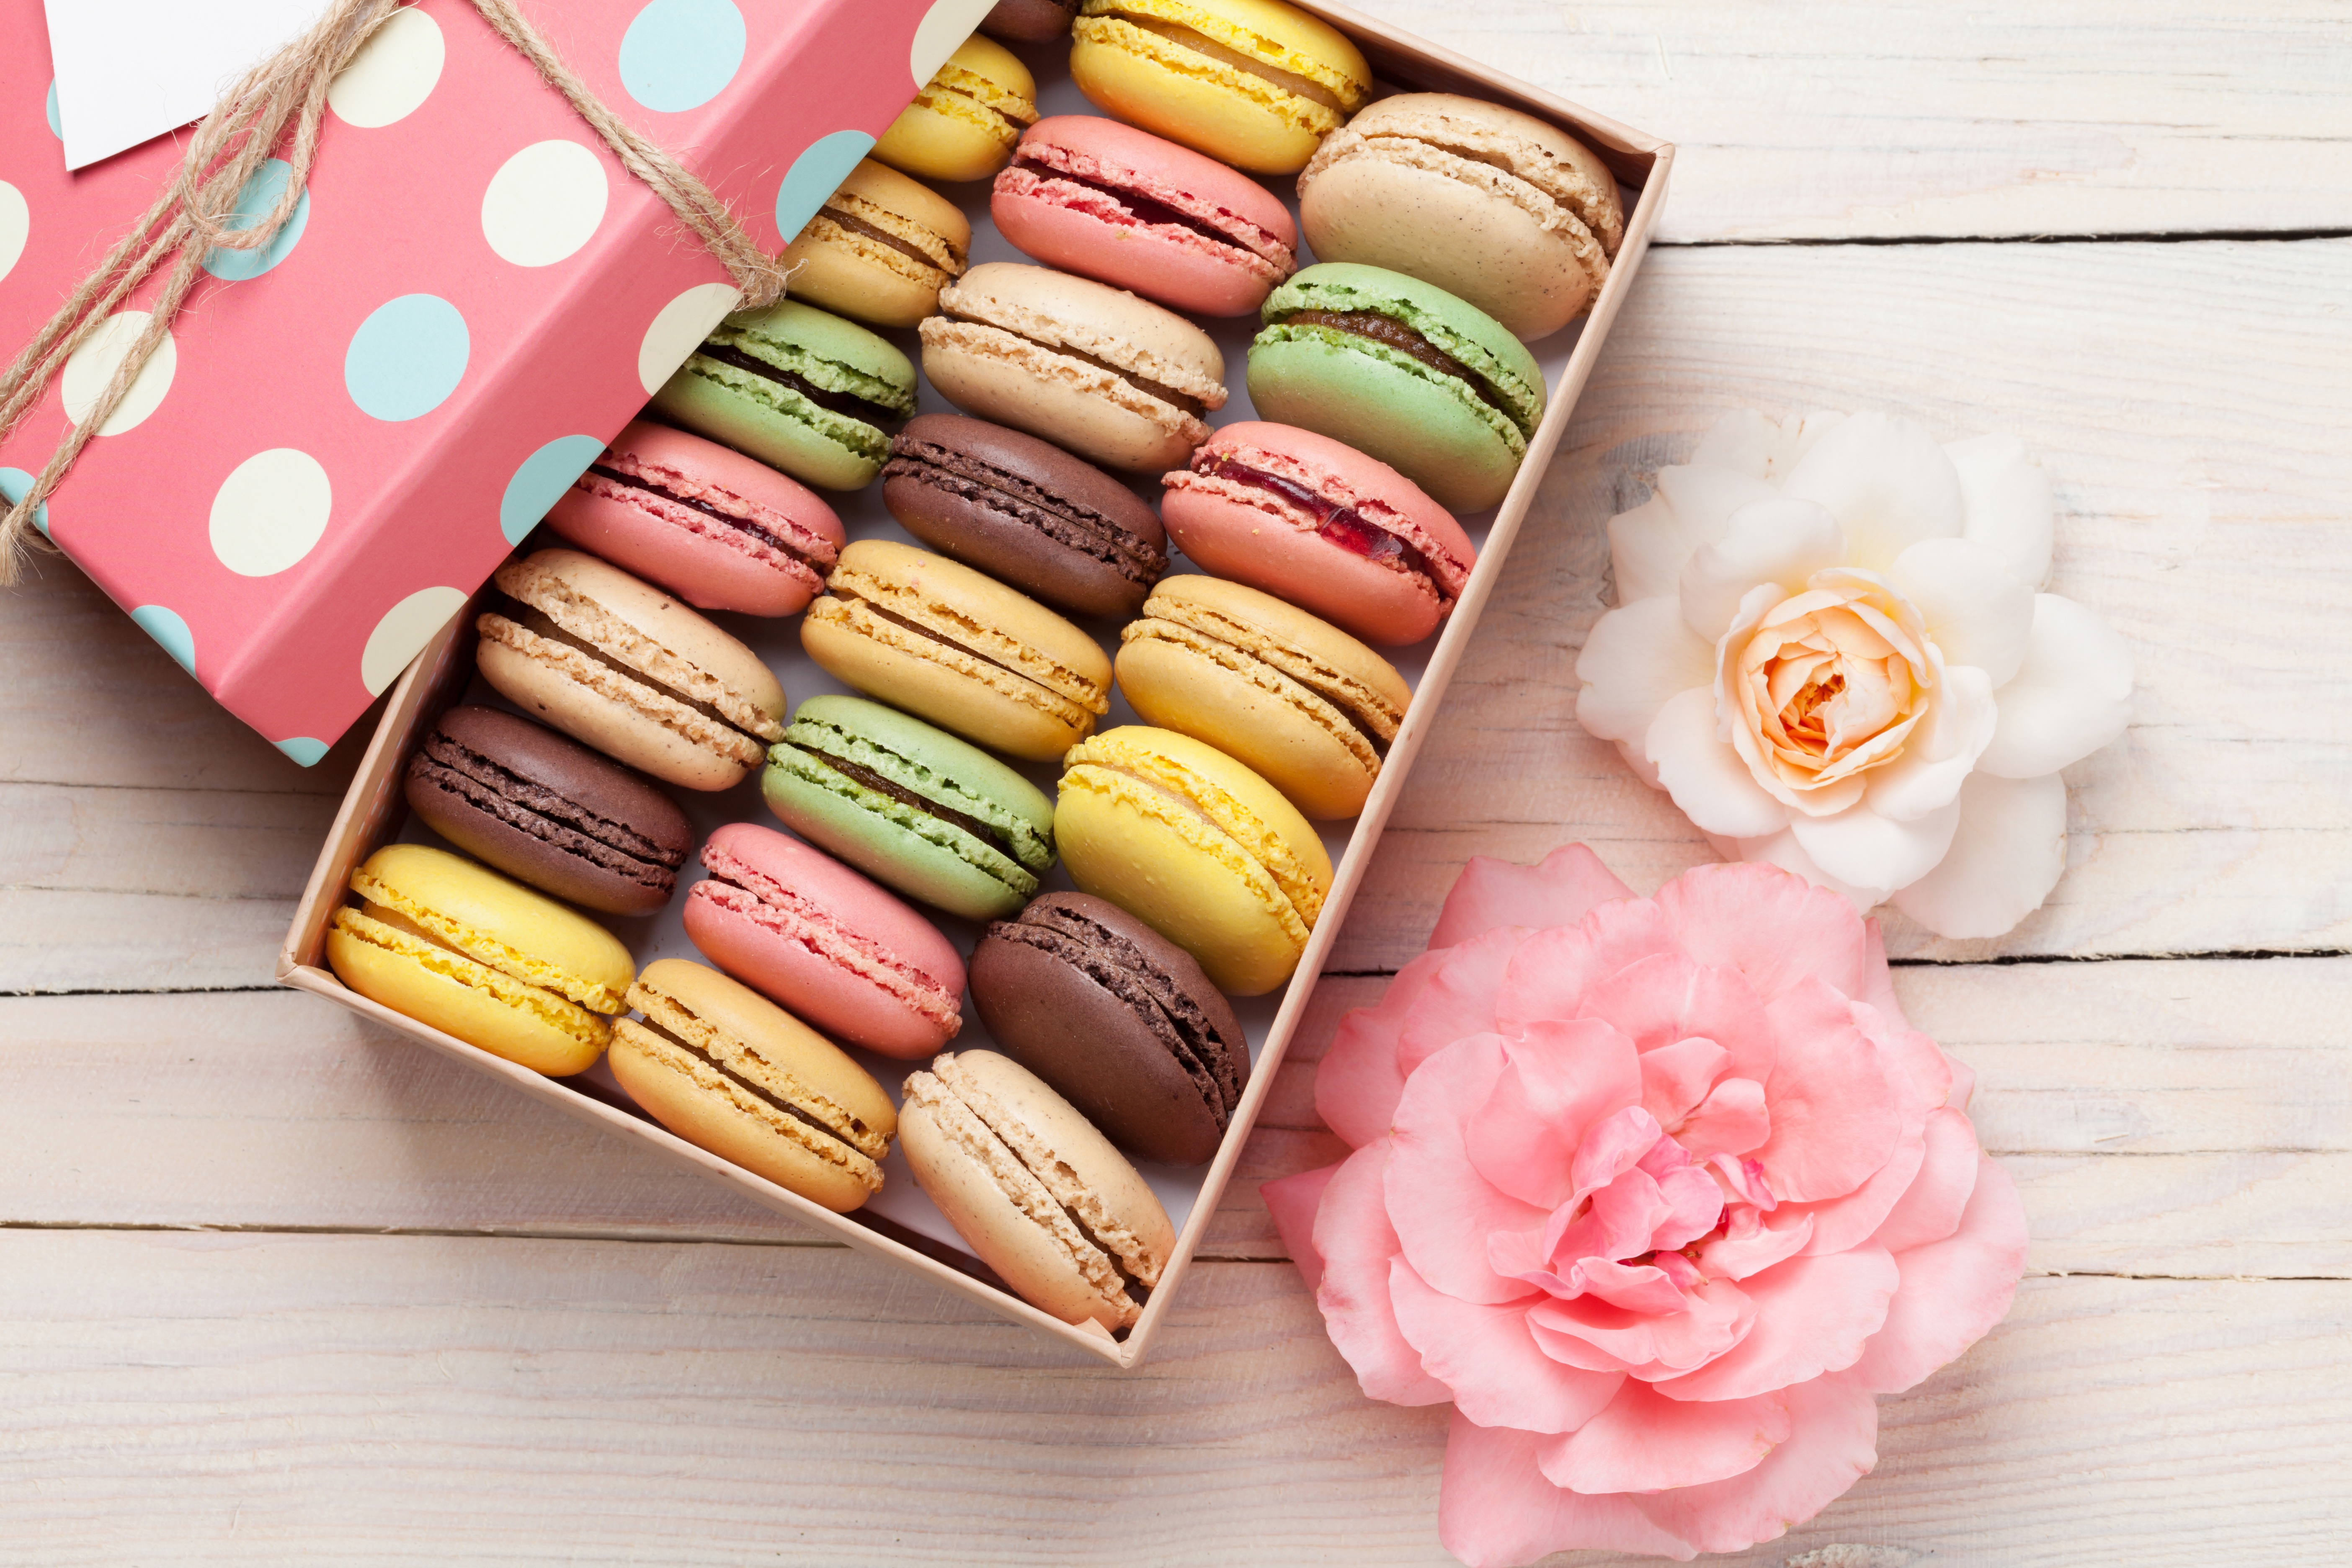 Colors Flower Gift Macaron Still Life Sweets 5616x3744